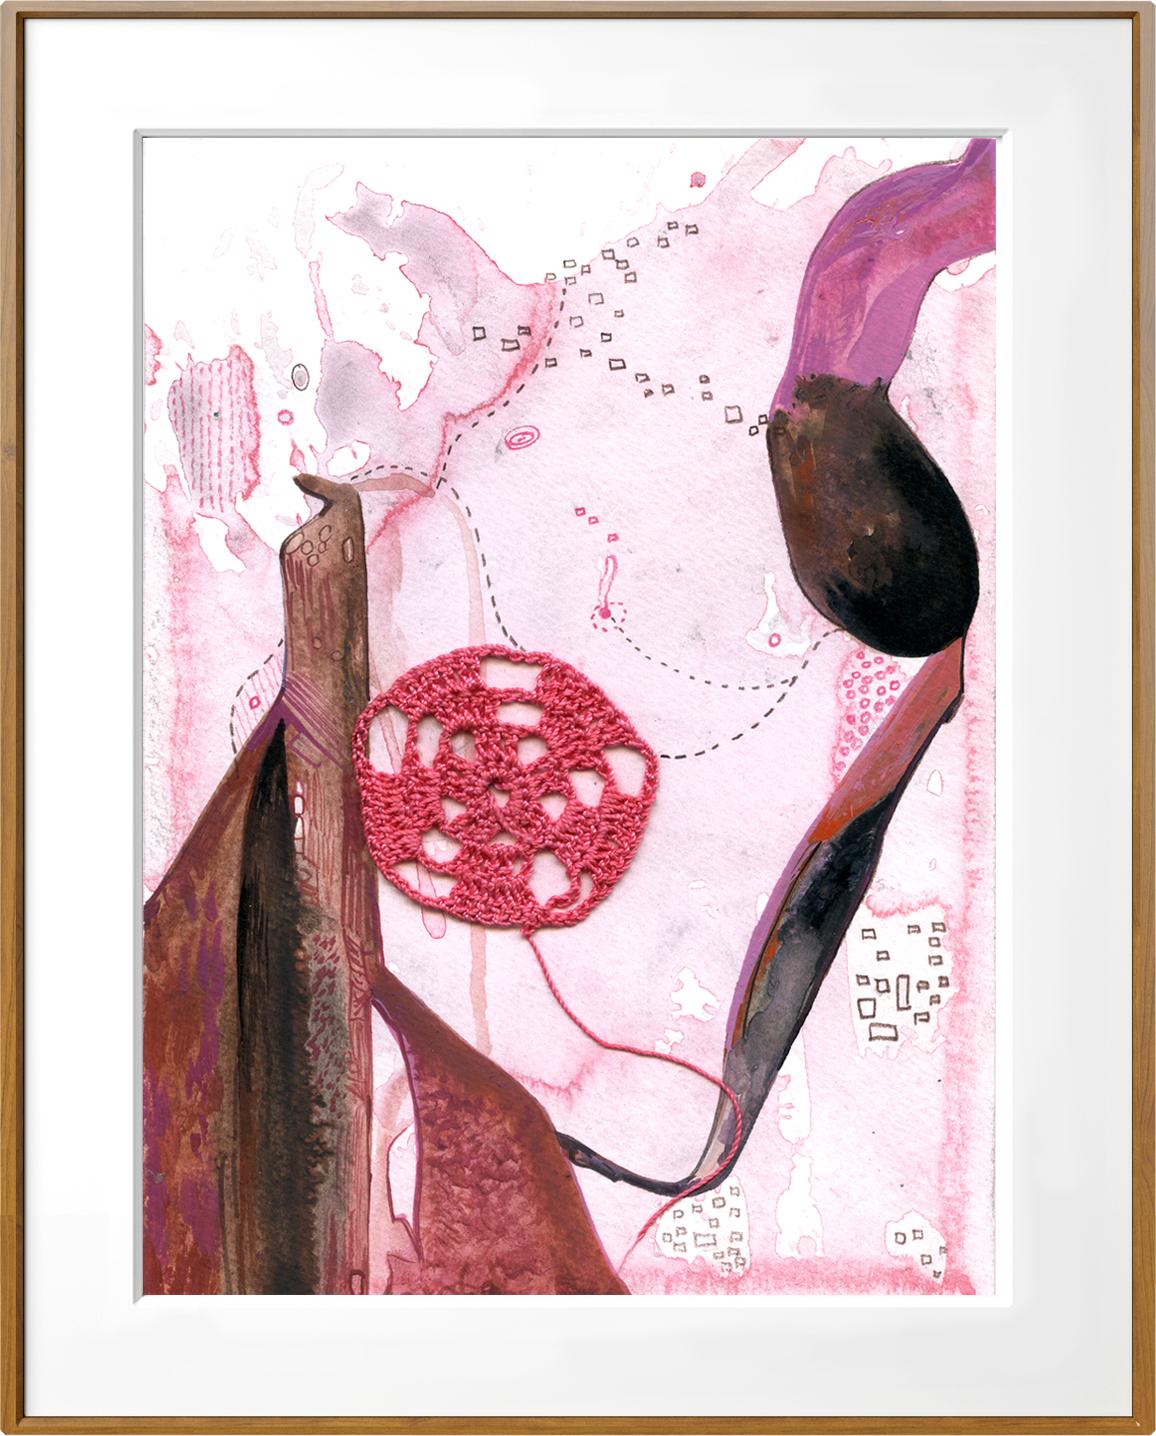 Birth Healing -  14 panel Pink, Red, and Grey Painting by Indian Artist  16